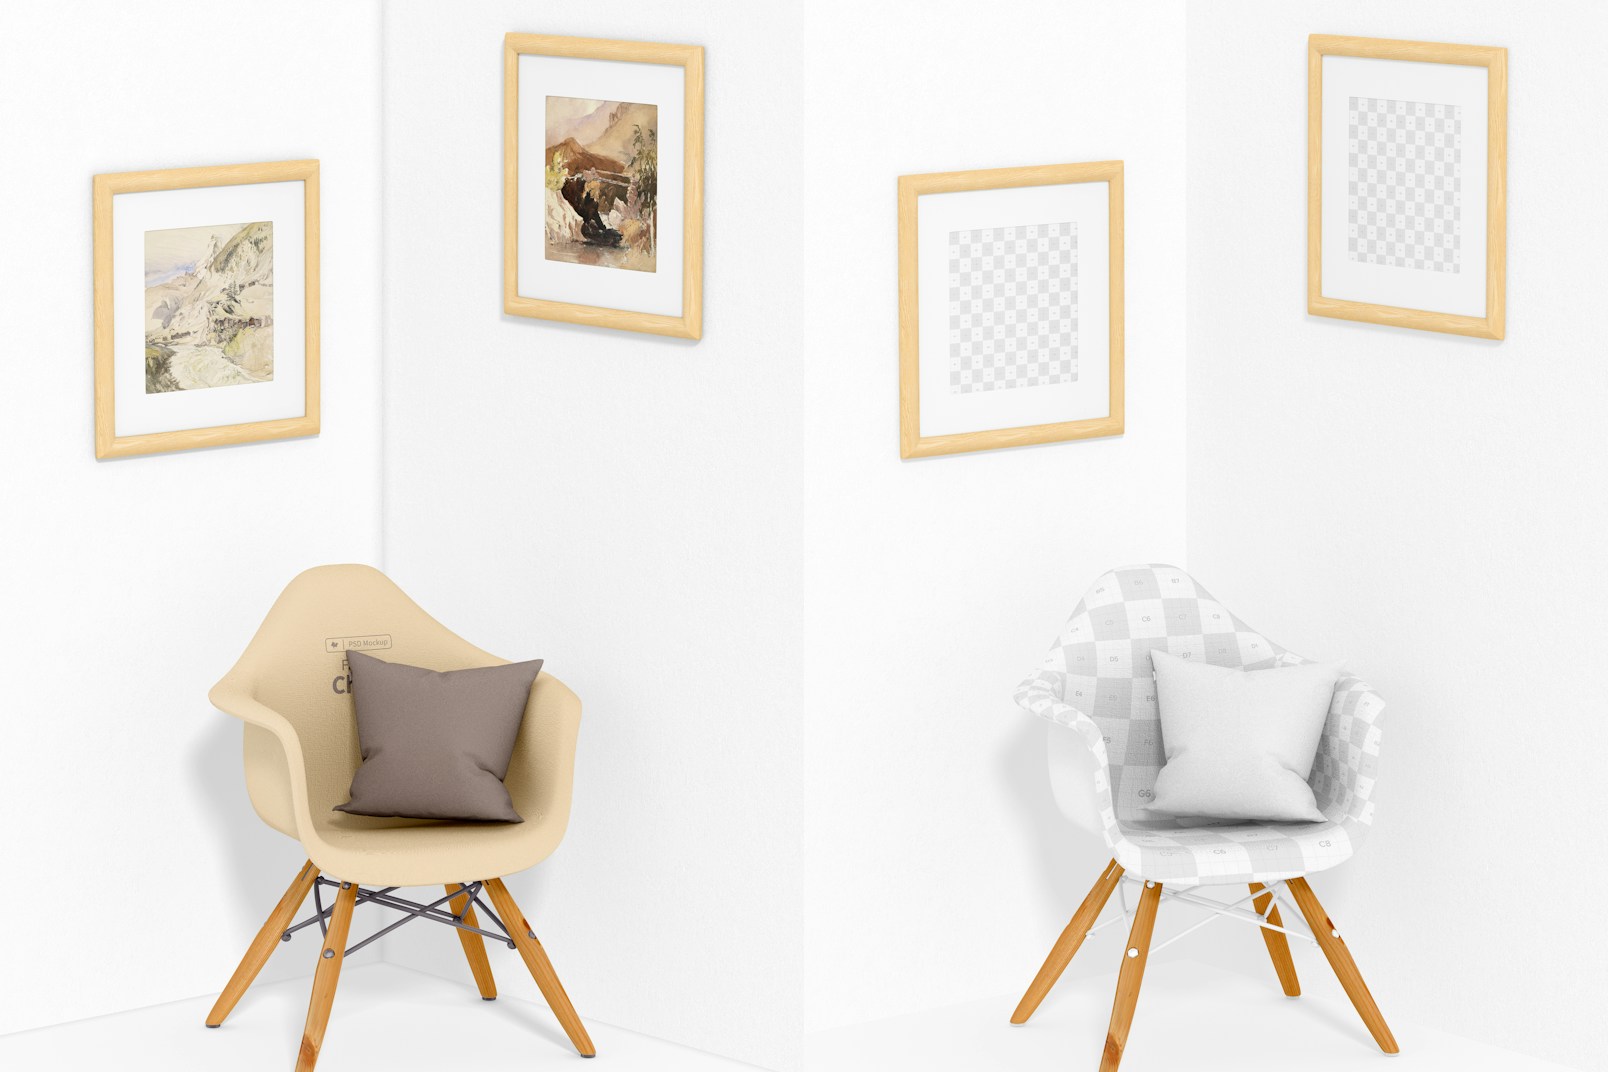 Square Frames with Fabric Chair Mockup, Perspective